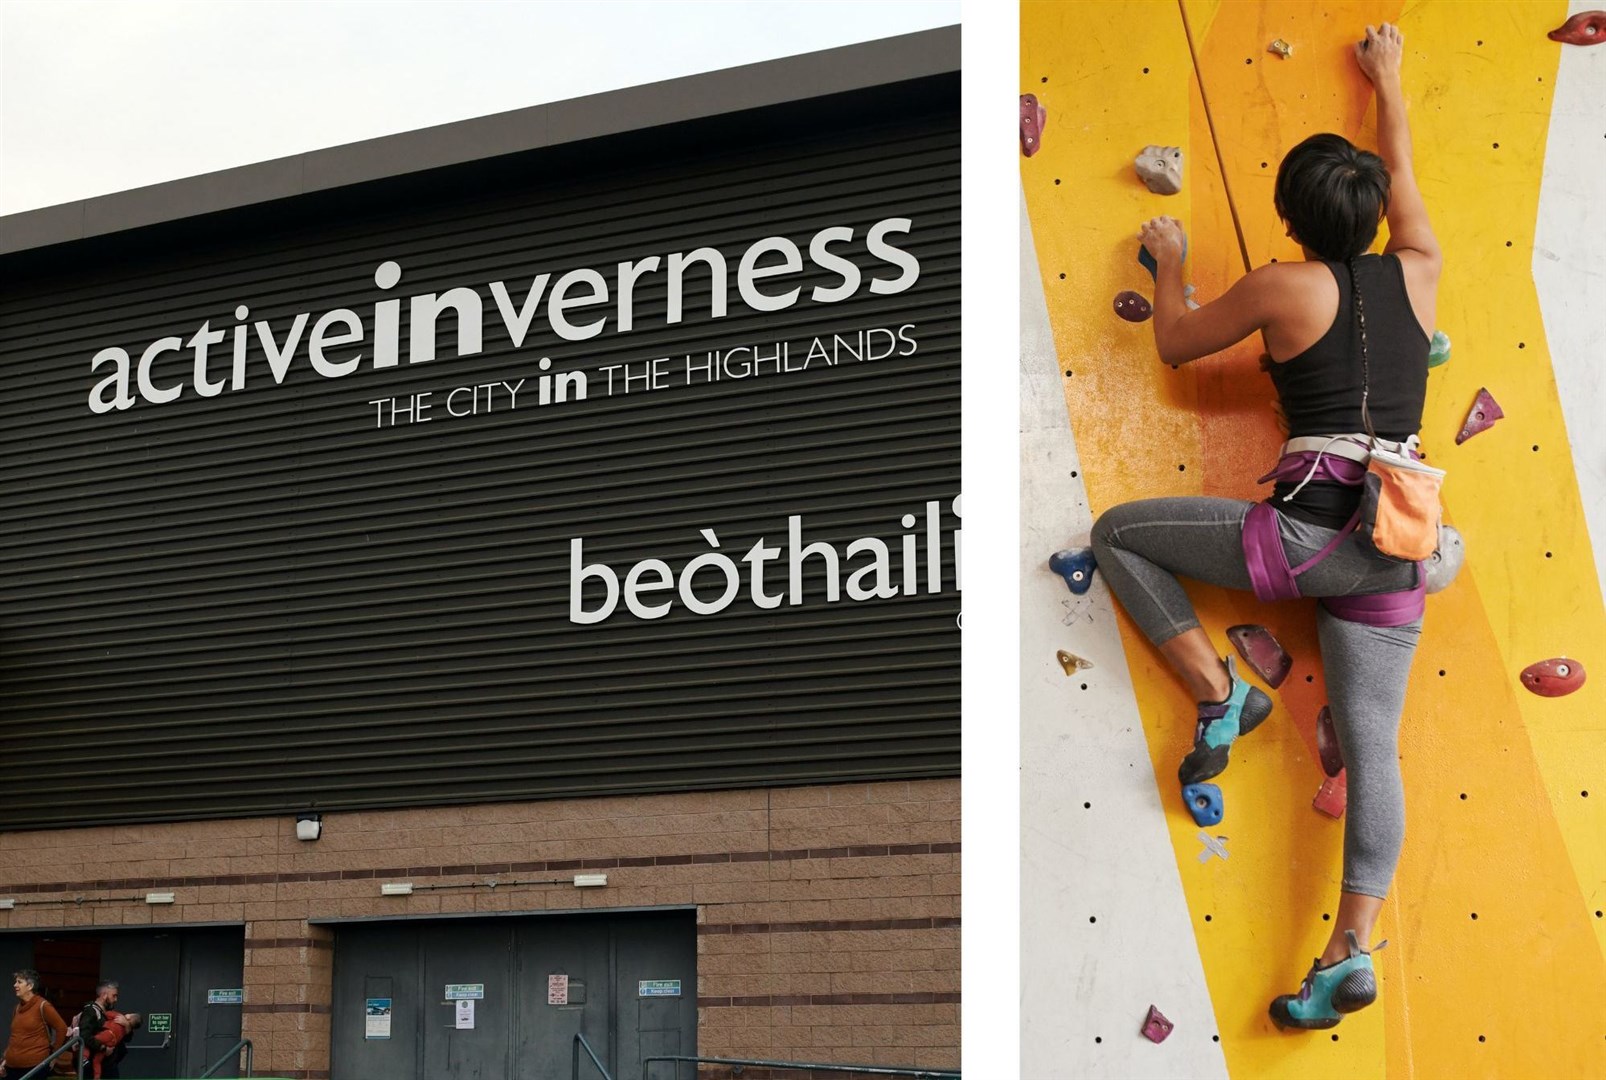 The climbing wall is set to close next month.